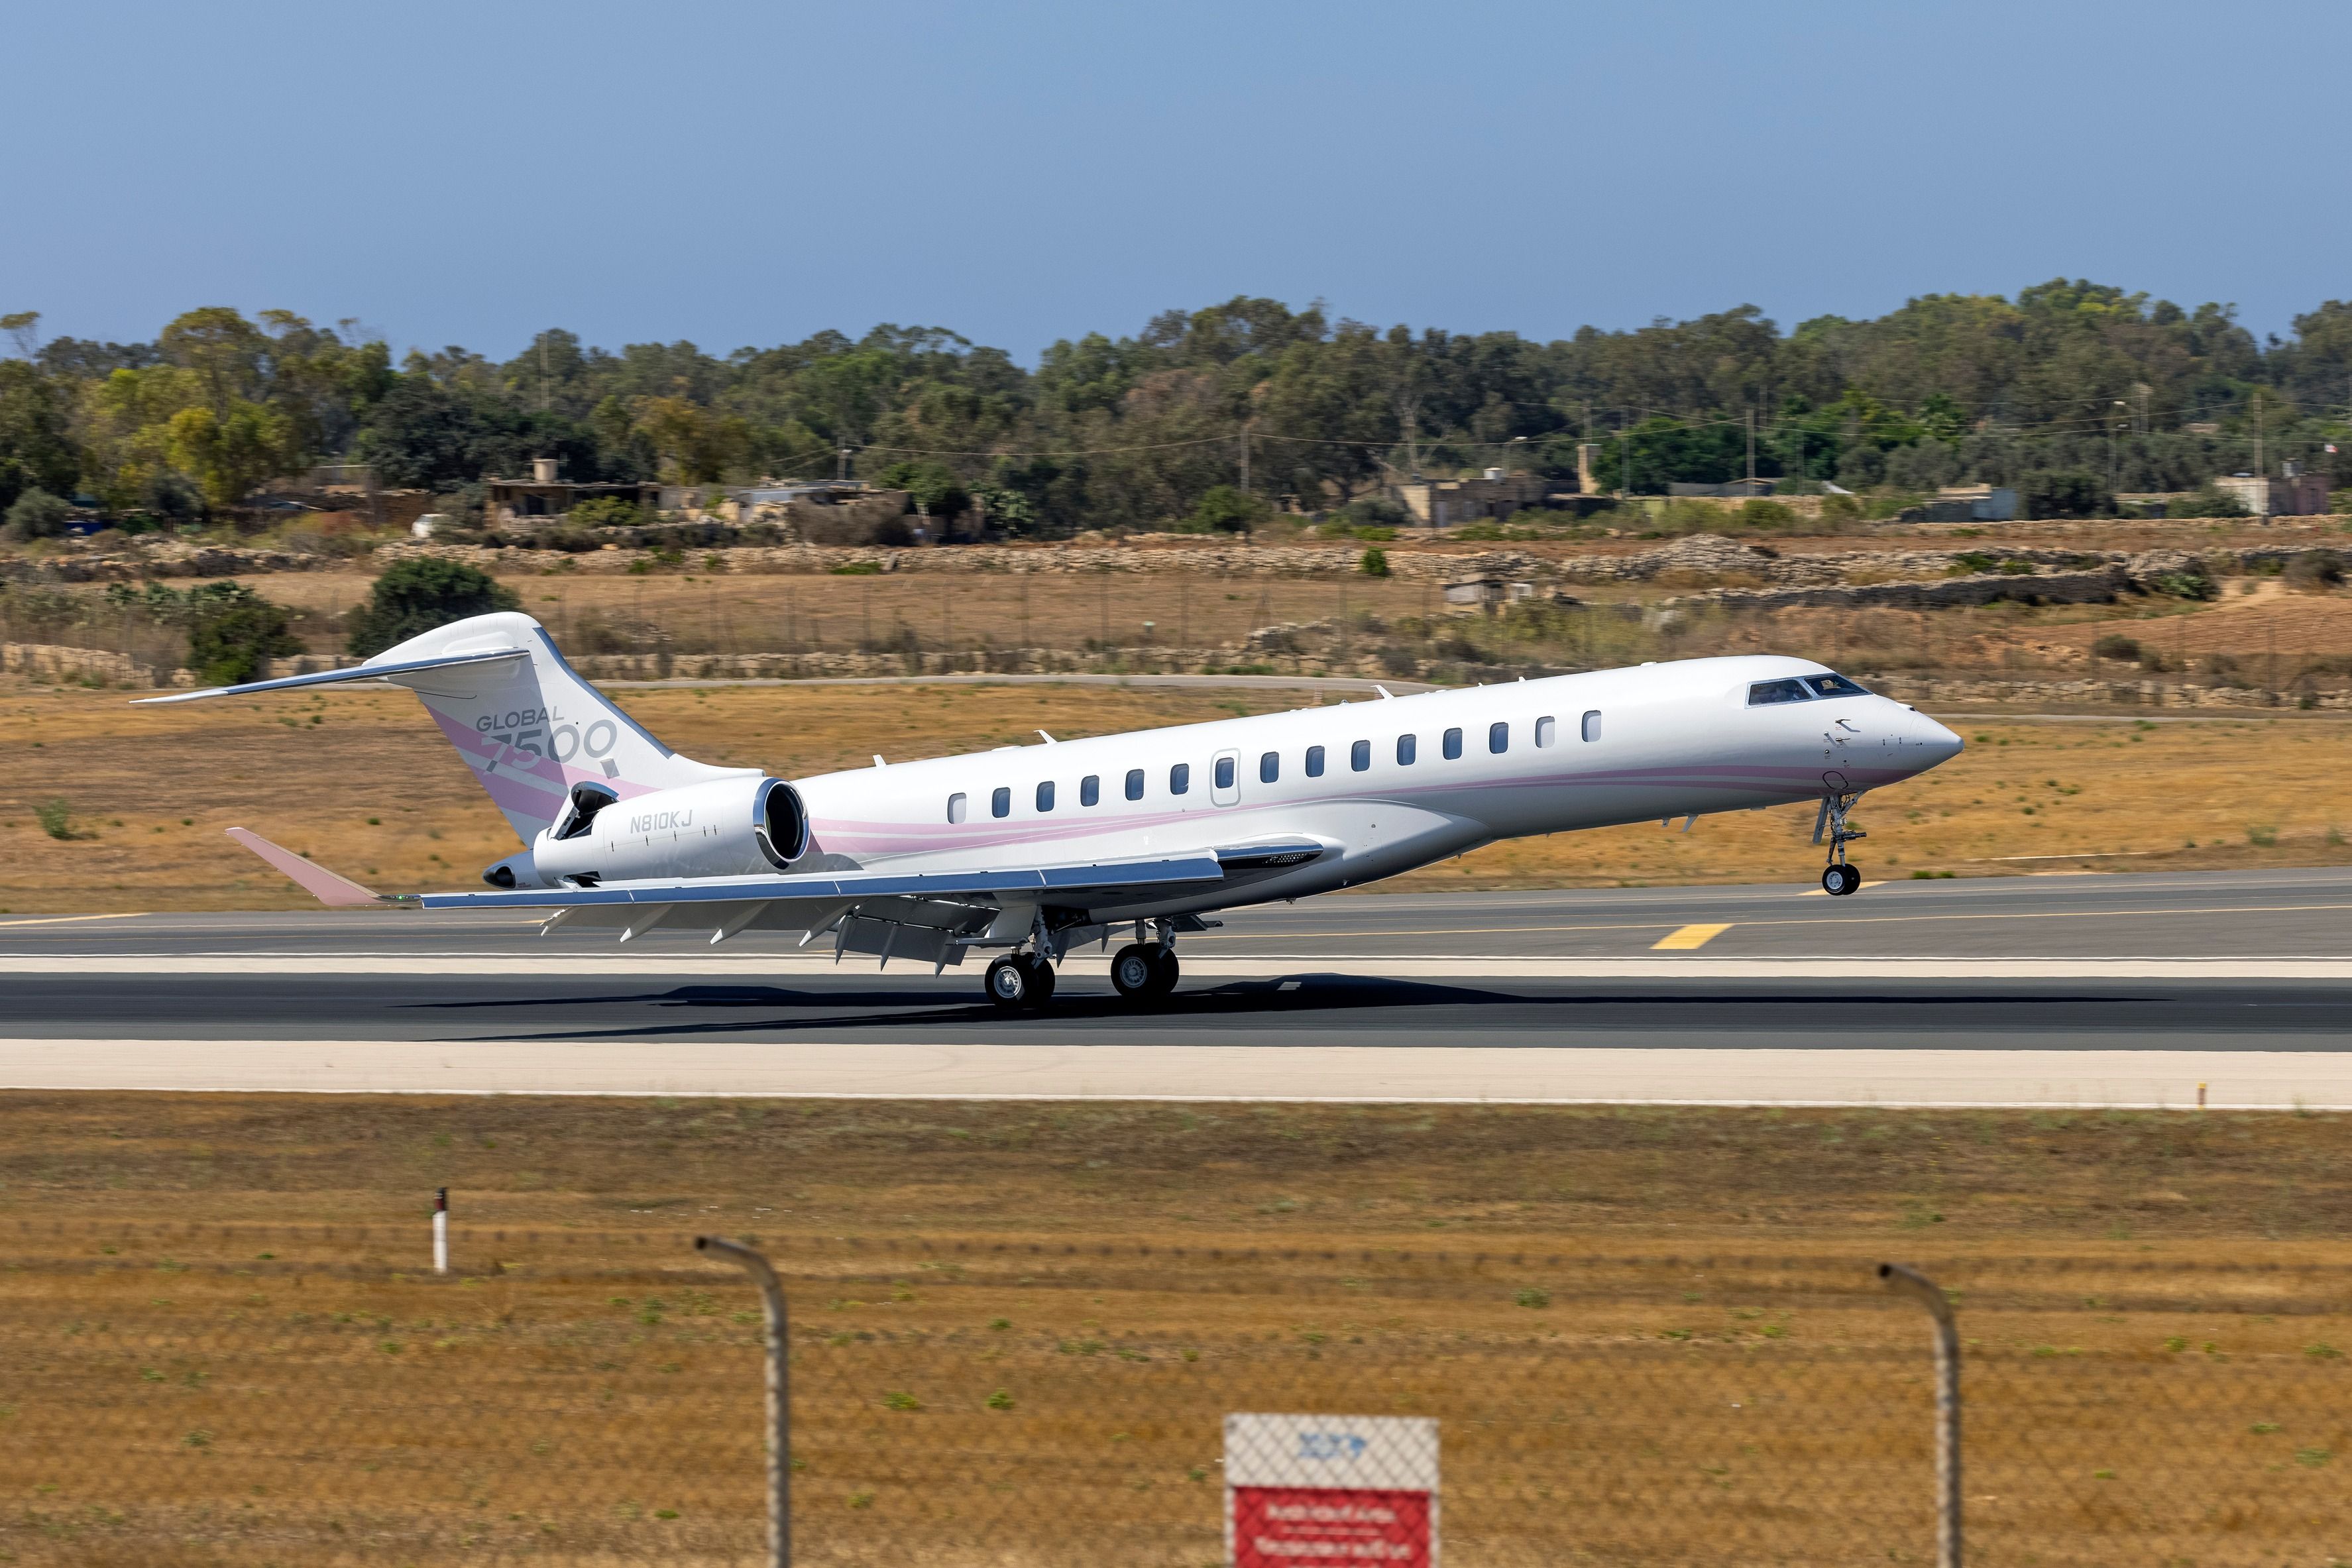 Kylie Jenner's Bombardier Global 7500 taking off from Malta.